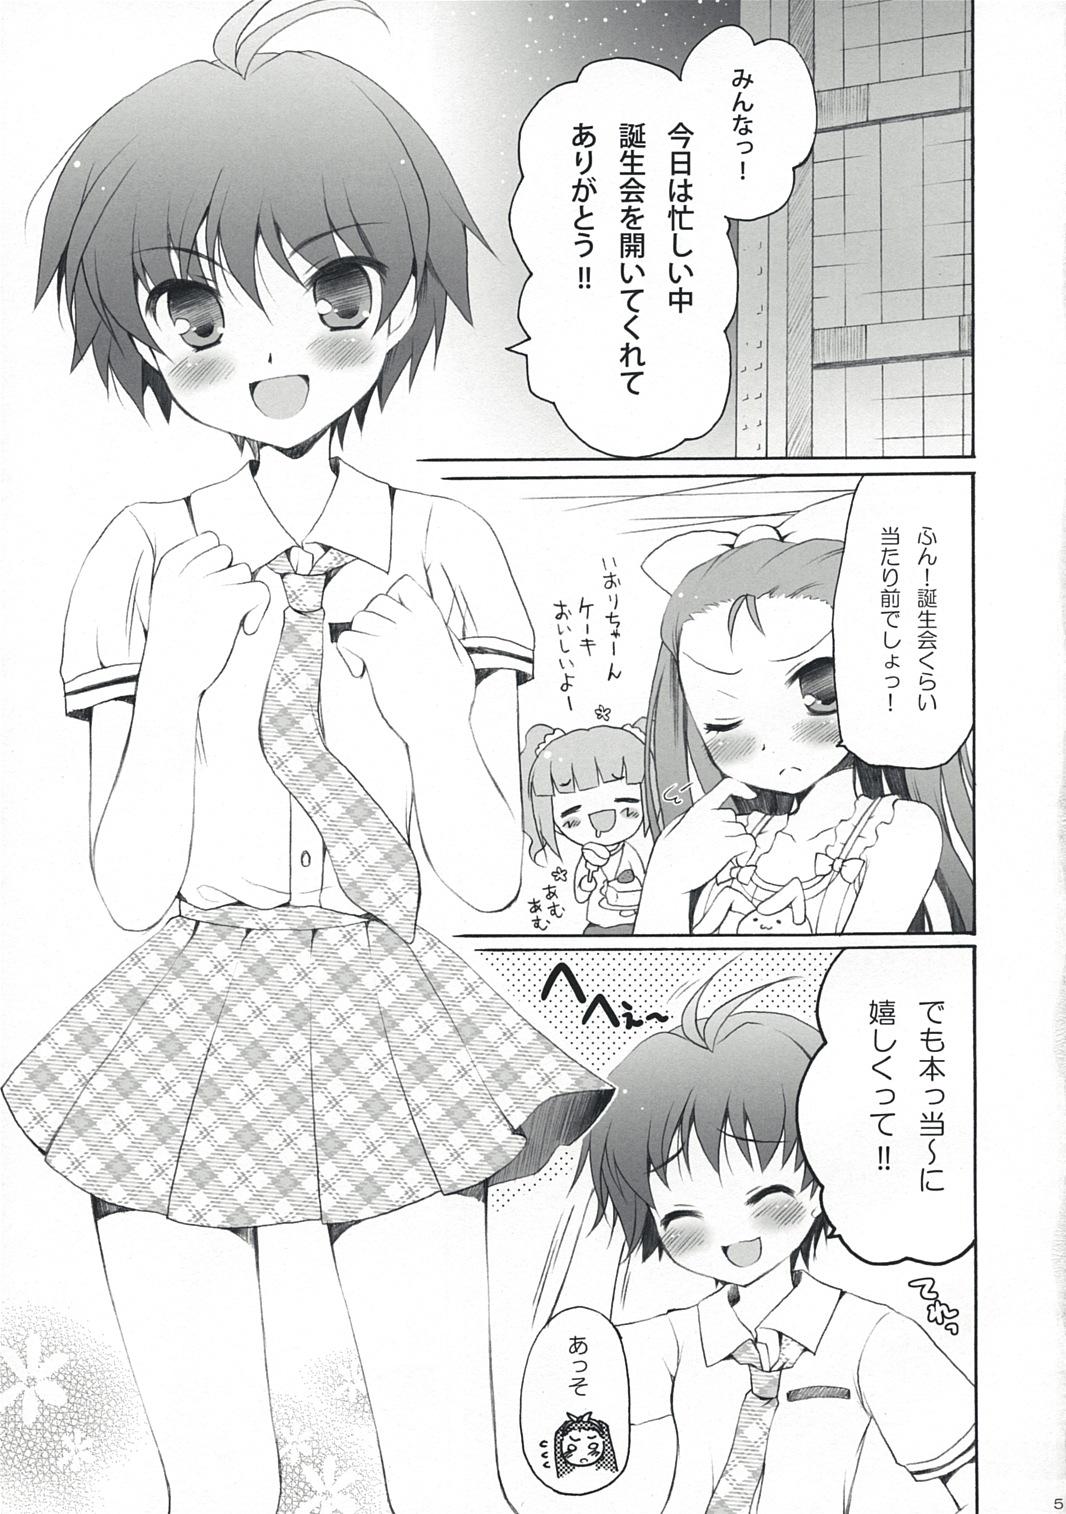 Best Blowjob goCCo - The idolmaster 18yearsold - Page 4